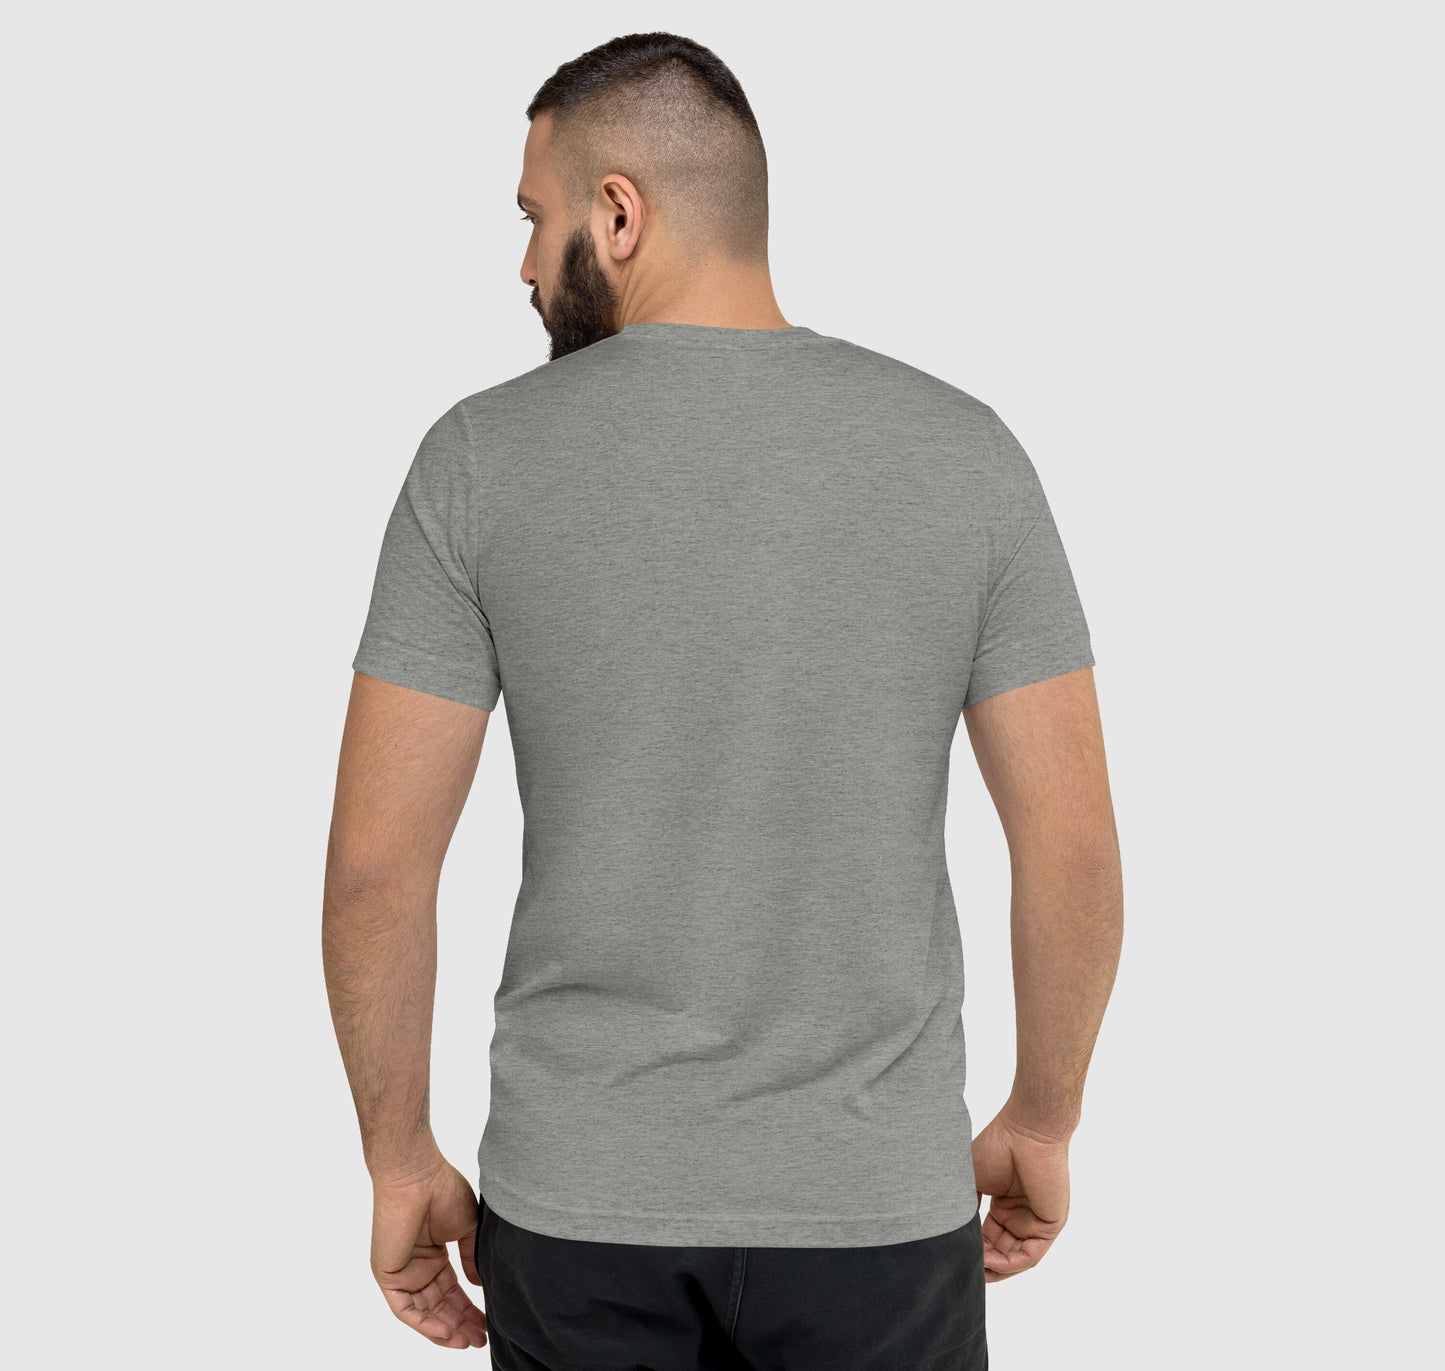 Athlete wearing the sport gray trophy tee, back view.